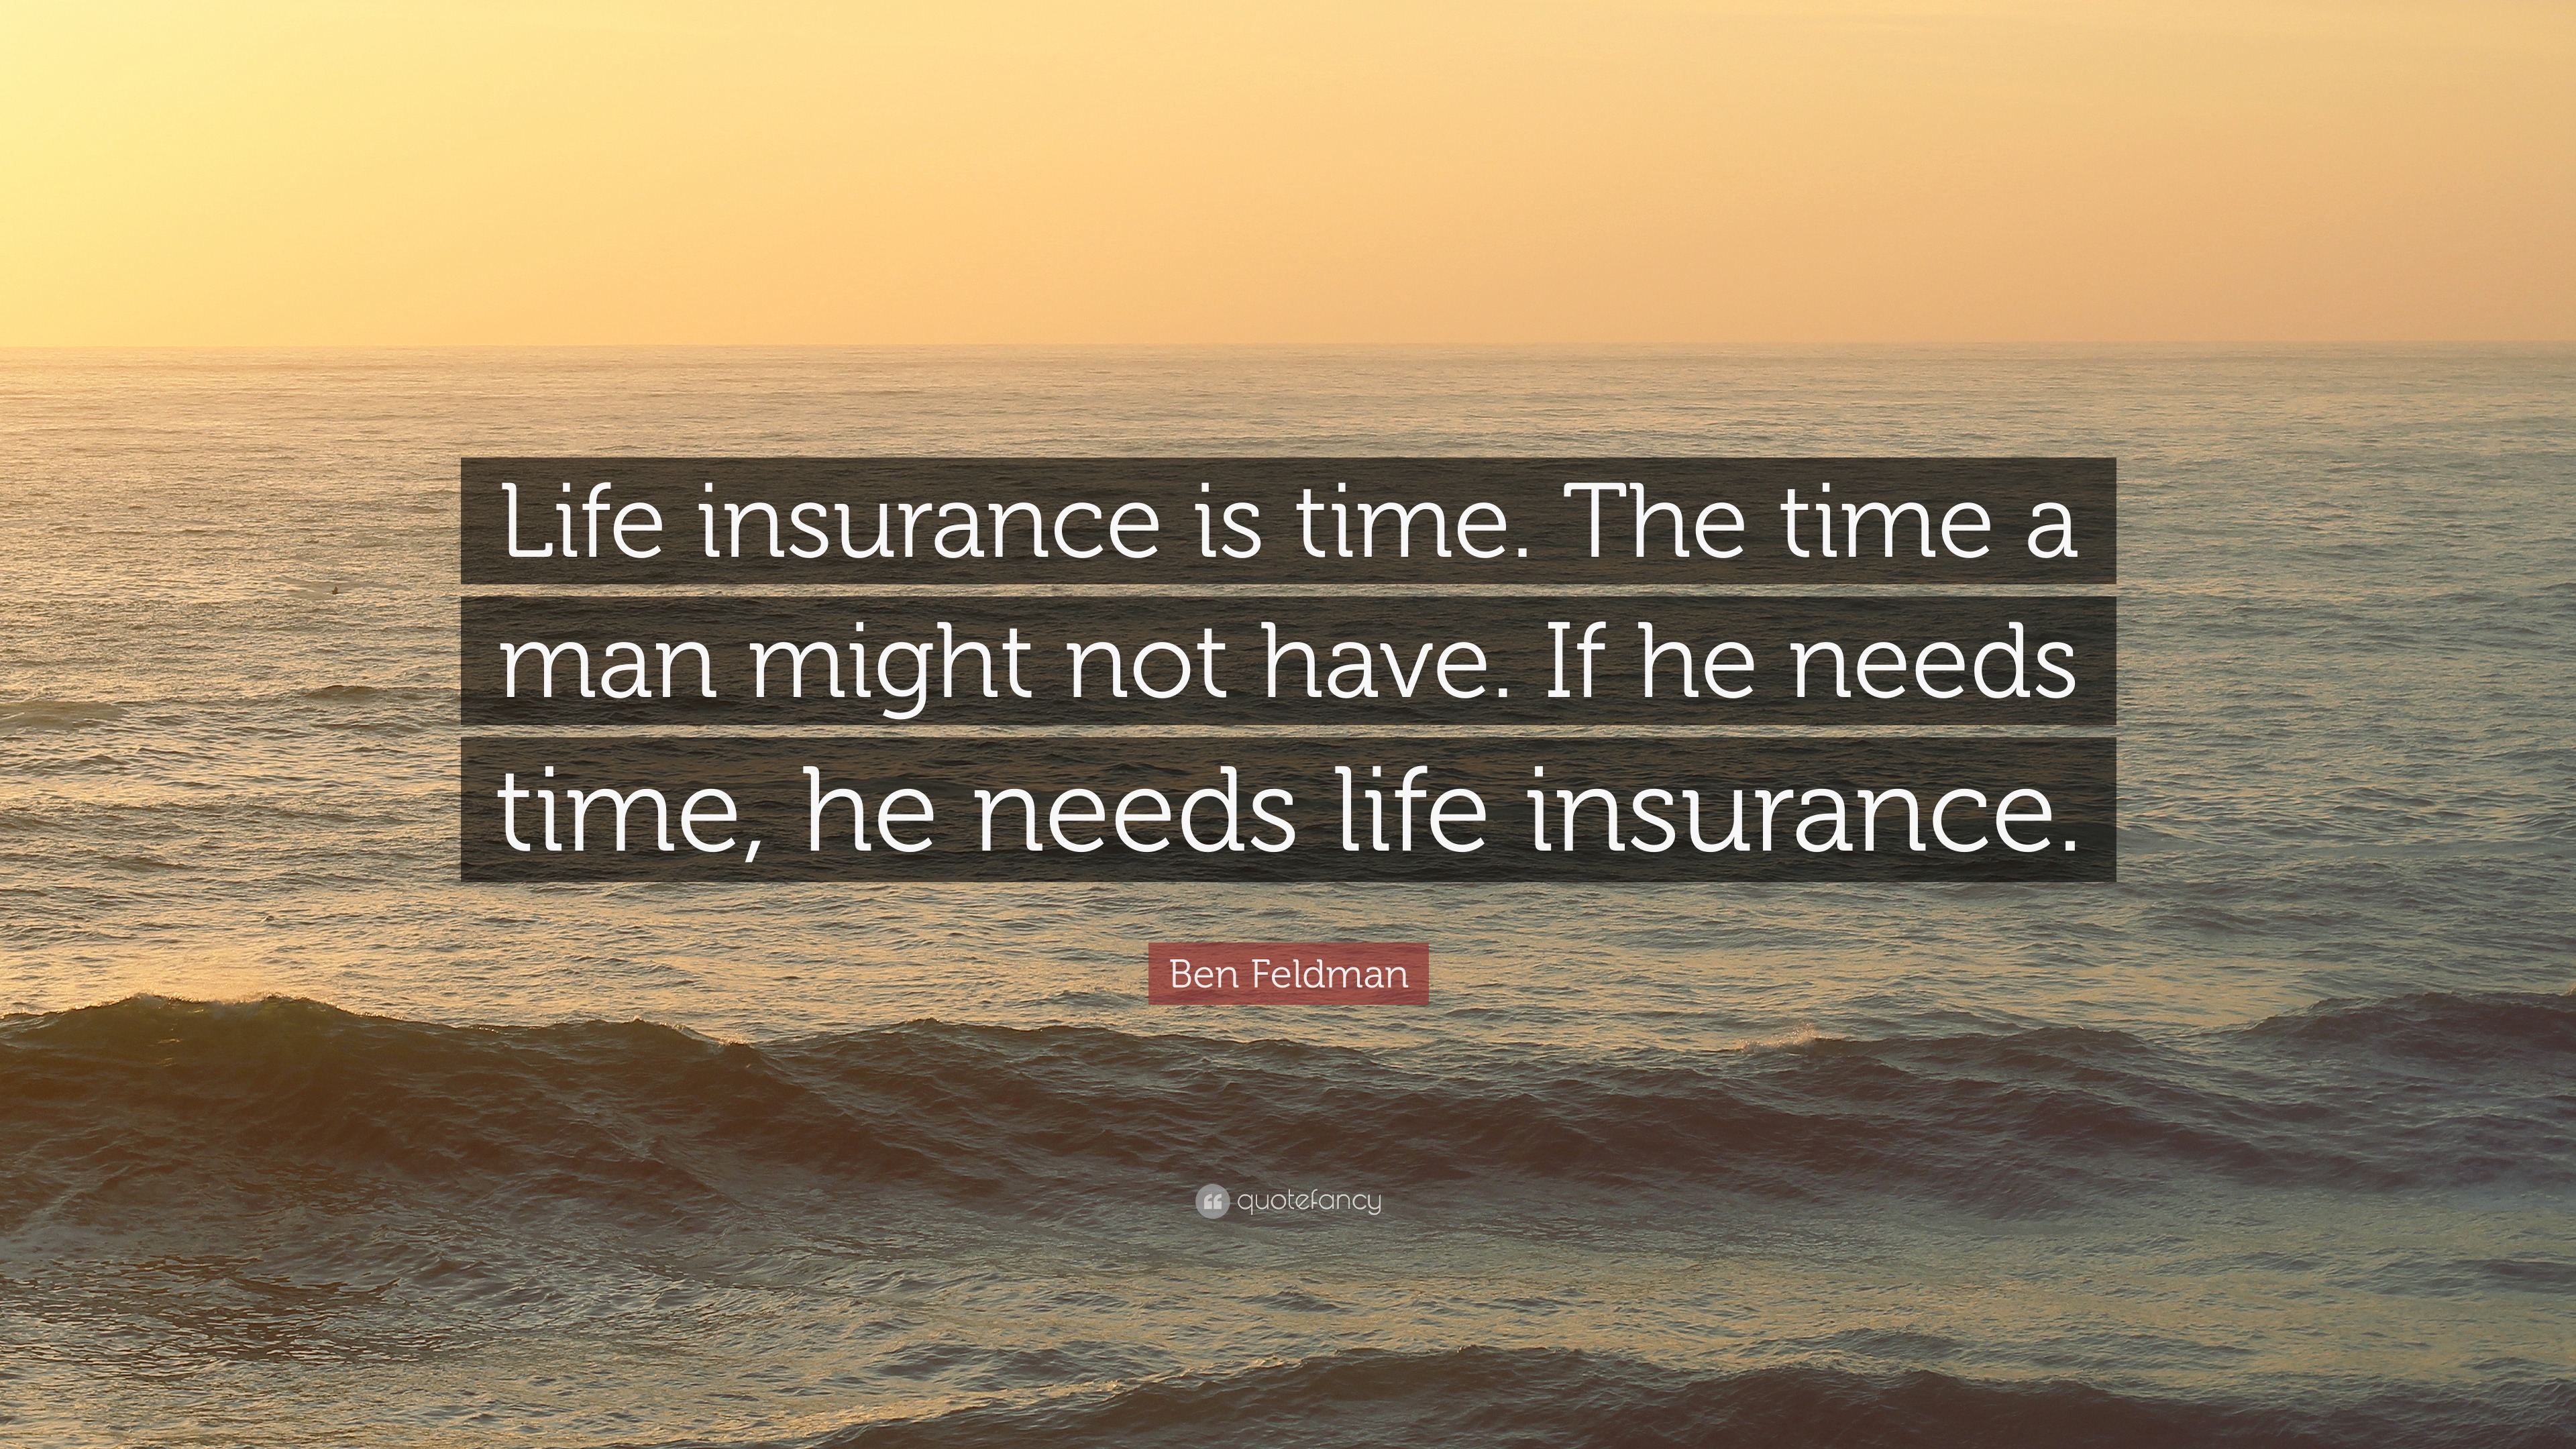 Ben Feldman Quote “Life insurance is time The time a man might not